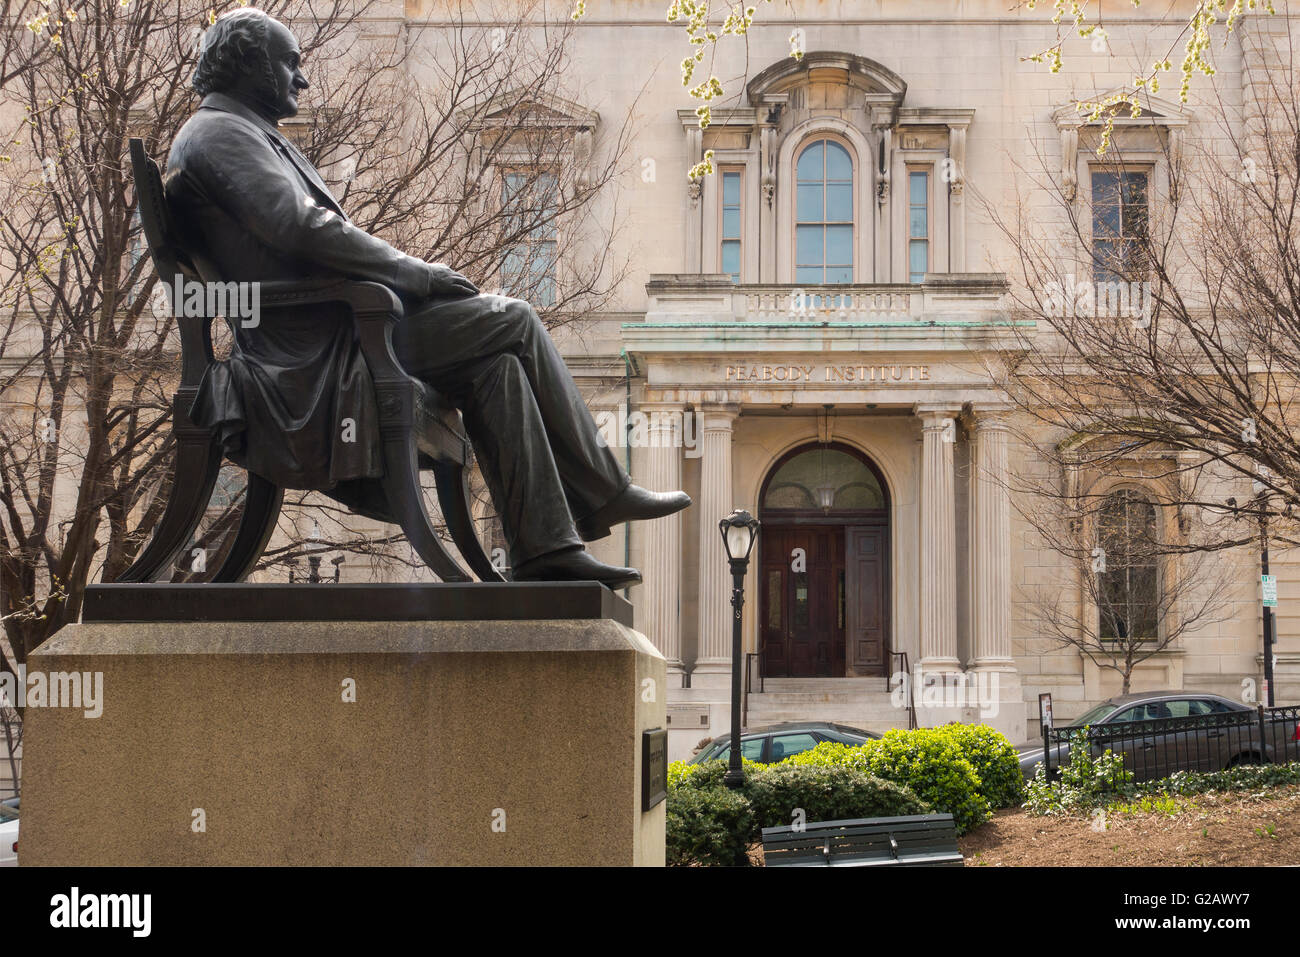 George Peabody sculpture Baltimore Maryland Stock Photo